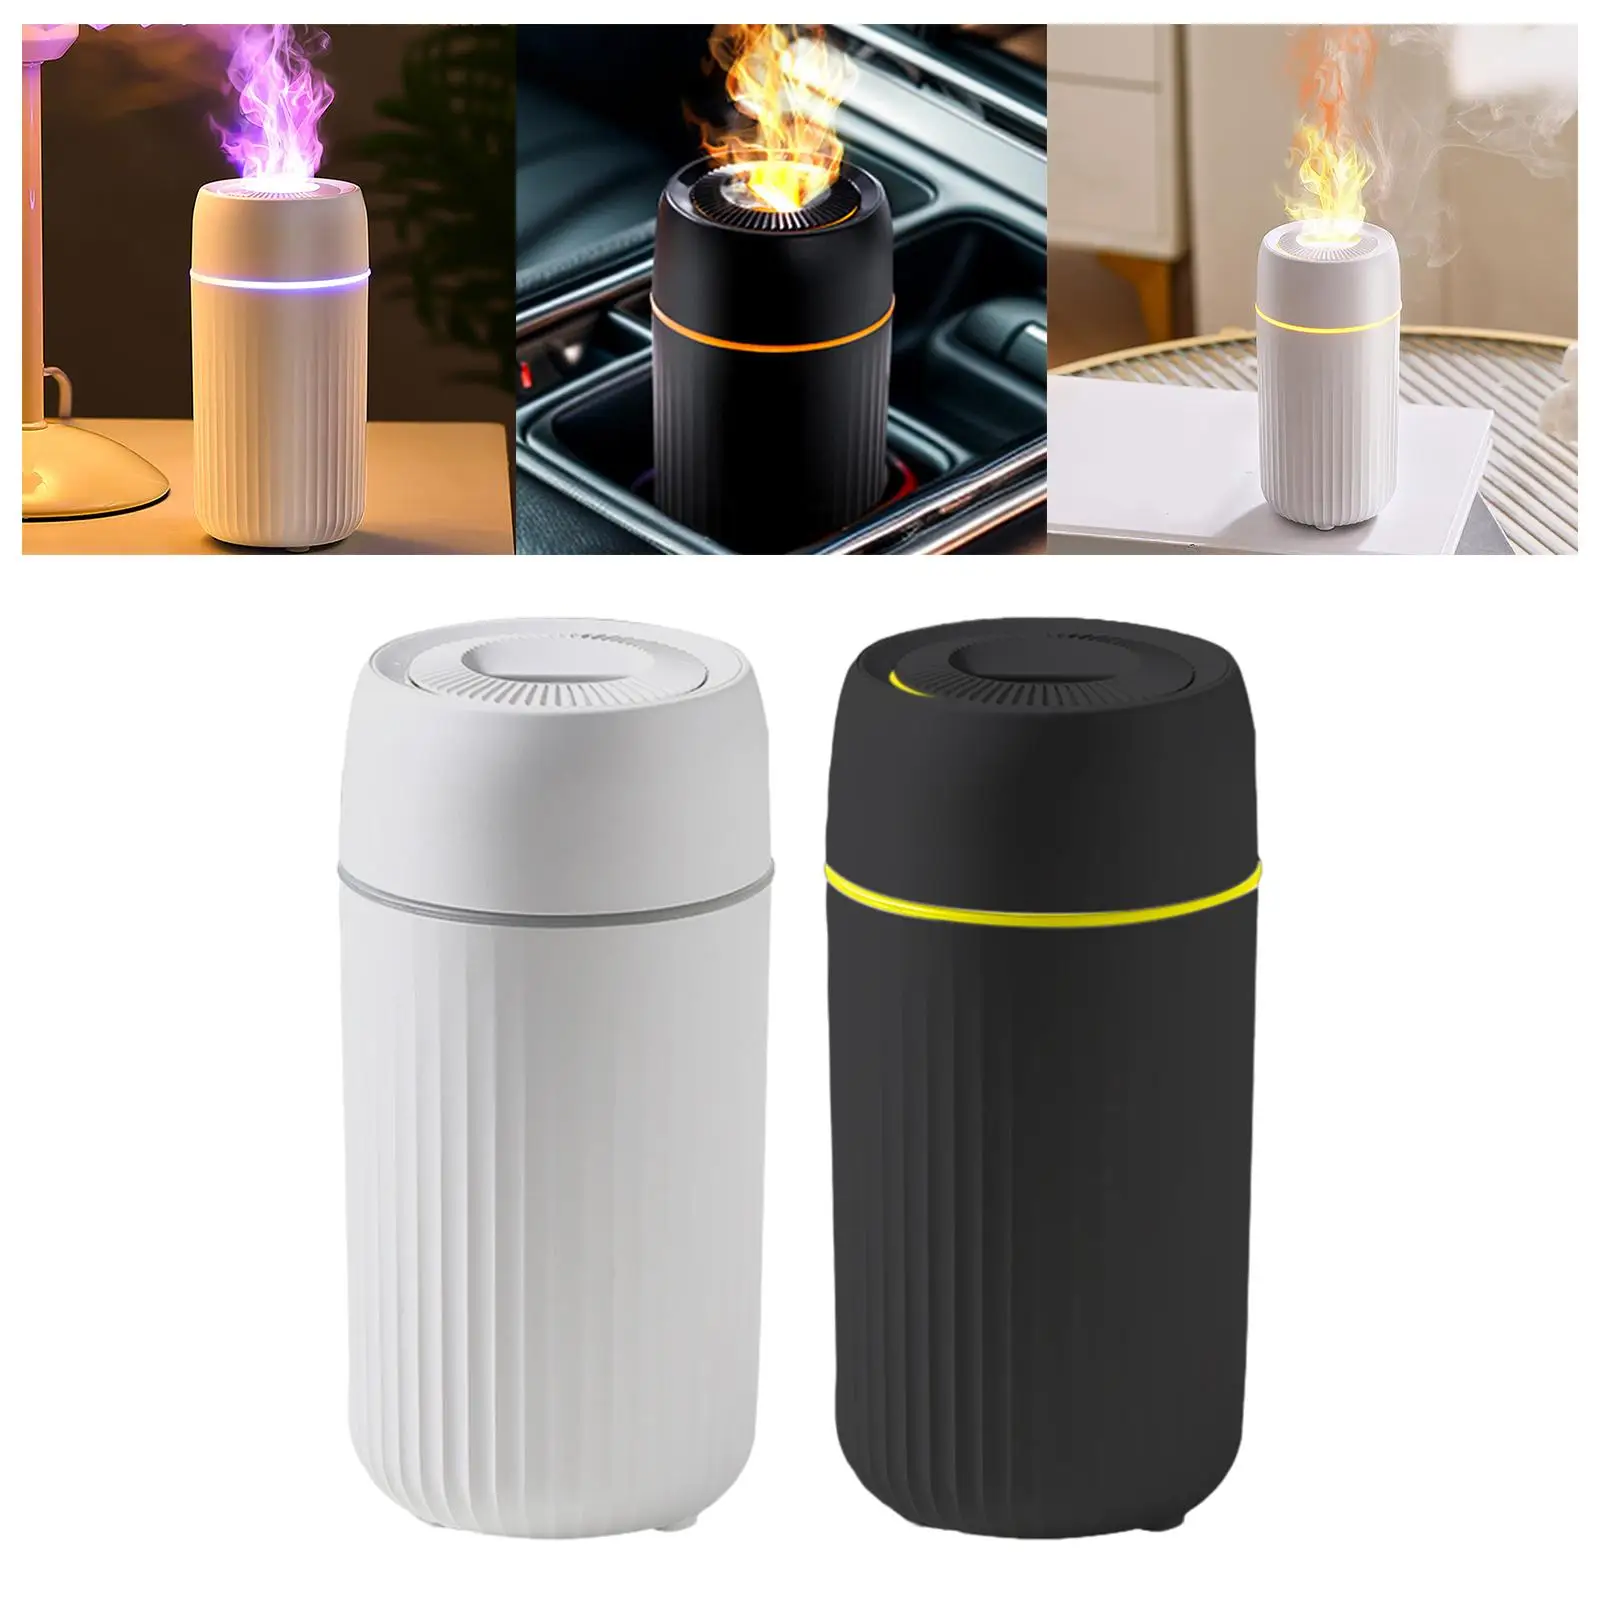 USB Aroma Diffuser Noiseless Air Diffuser 100ml Essential Oil Diffuser Quiet Desk Humidifier for SPA Room Car Office Living Room